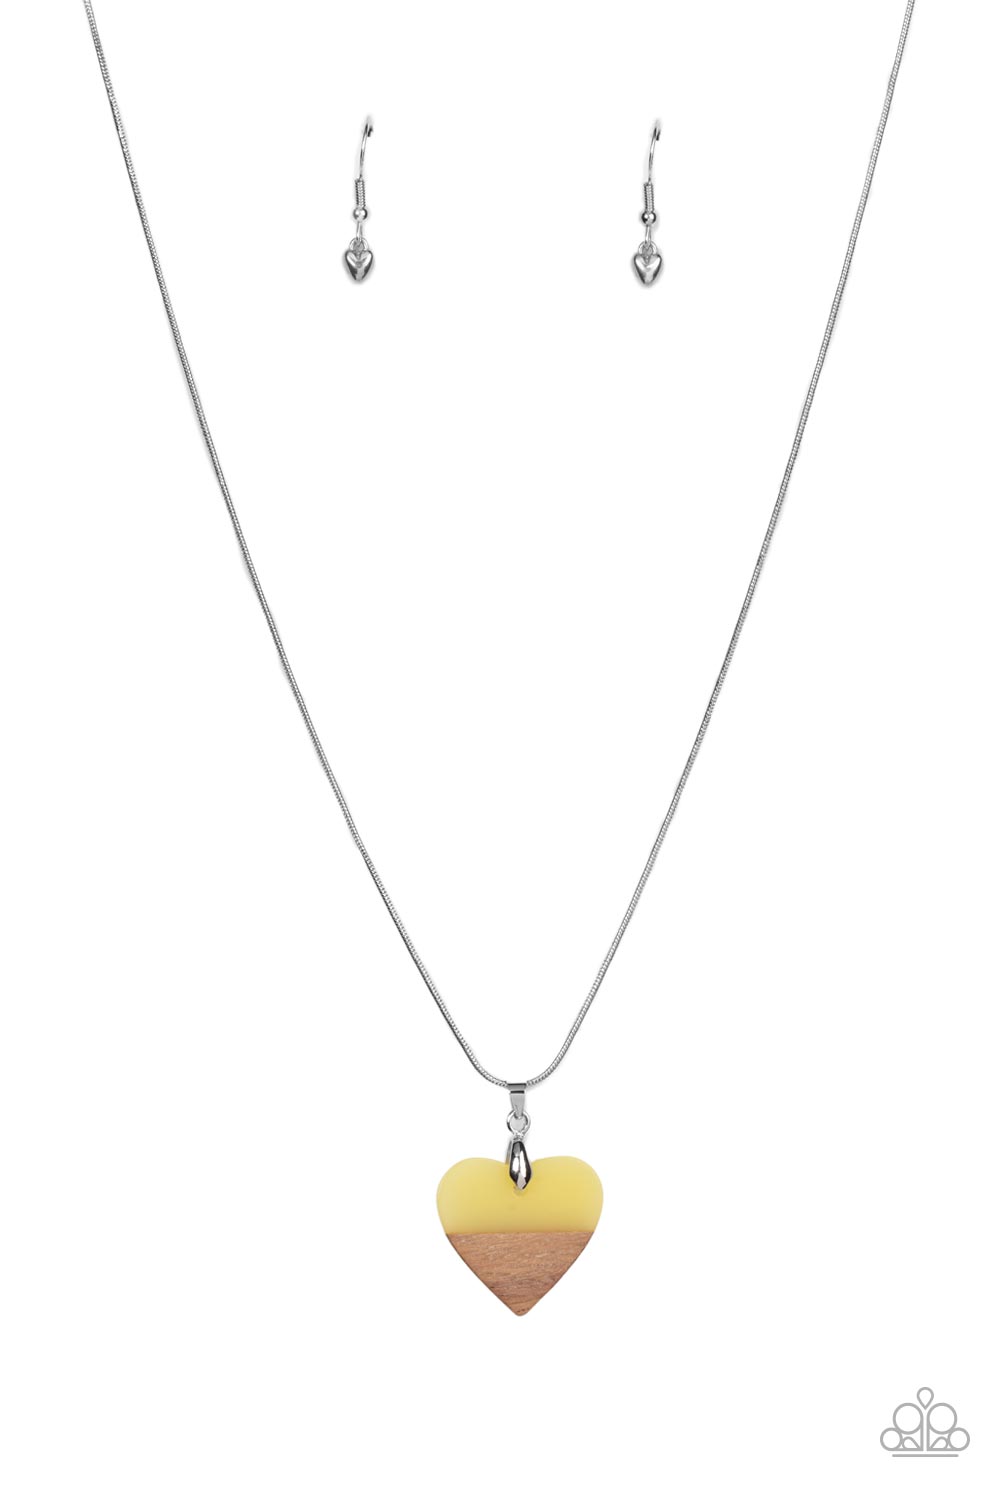 You Complete Me - Yellow and Wood Heart Necklace - Paparazzi Accessories